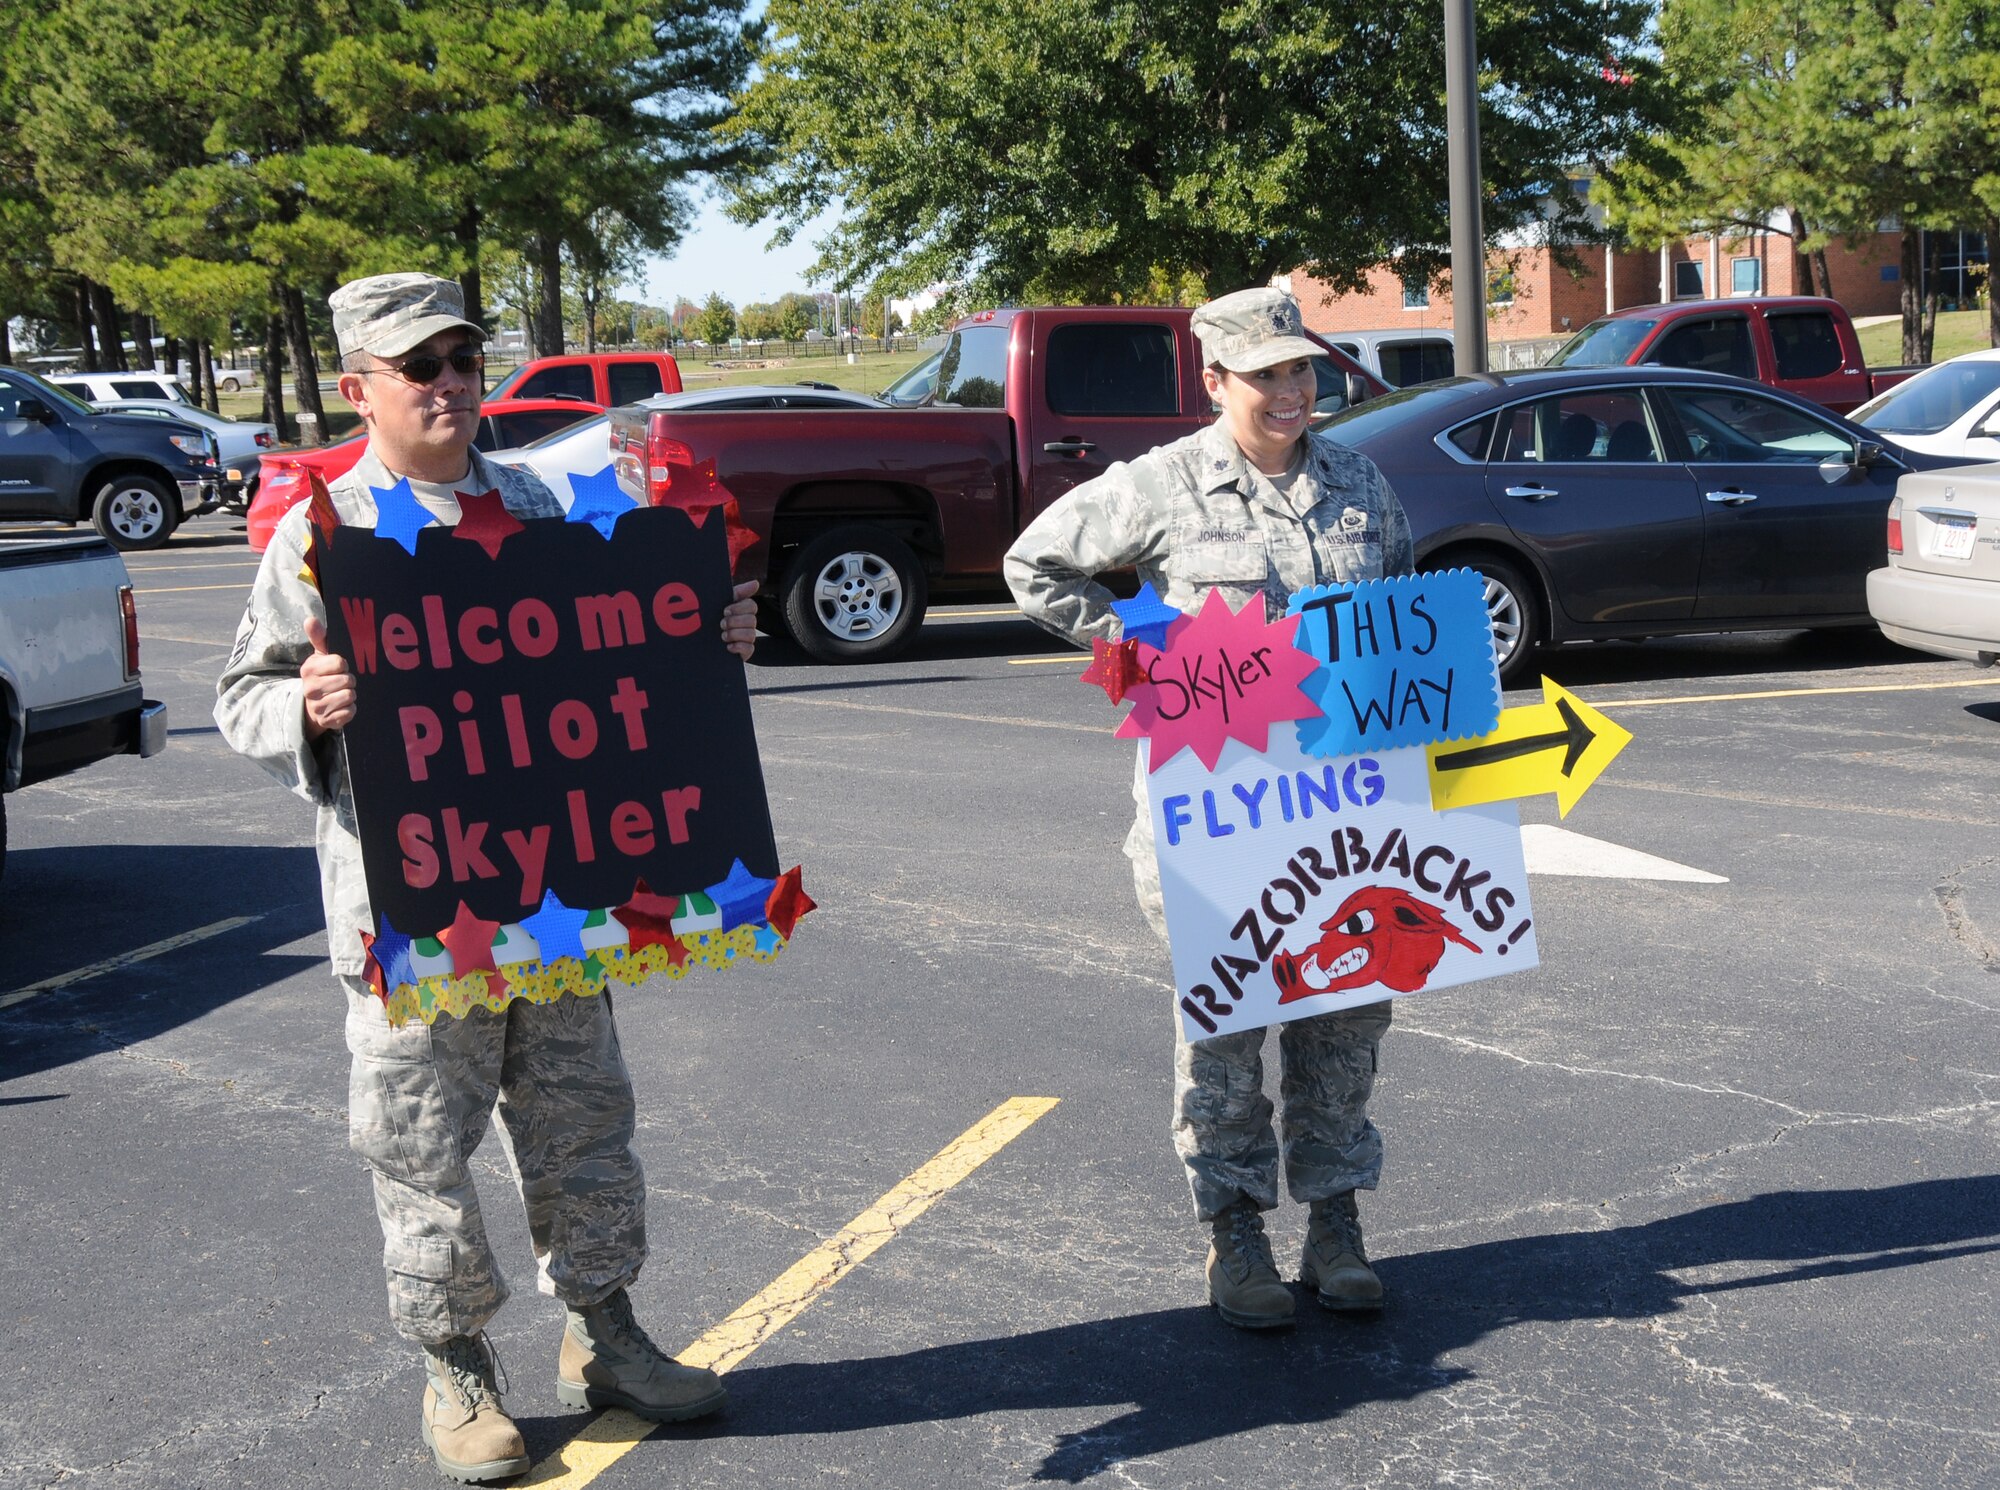 Master Sgt. Jesse Cabalar, a knowledge operations management specialist with the 188th Mission Support Group, and Lt. Col. Jenny Johnson, 188th Fighter Wing judge advocate, hold signs welcoming pilot for a day Skyler Leroy to the 188th. (U.S. Air National Guard photo by Senior Airman John Hillier/188th Fighter Wing Public Affairs)